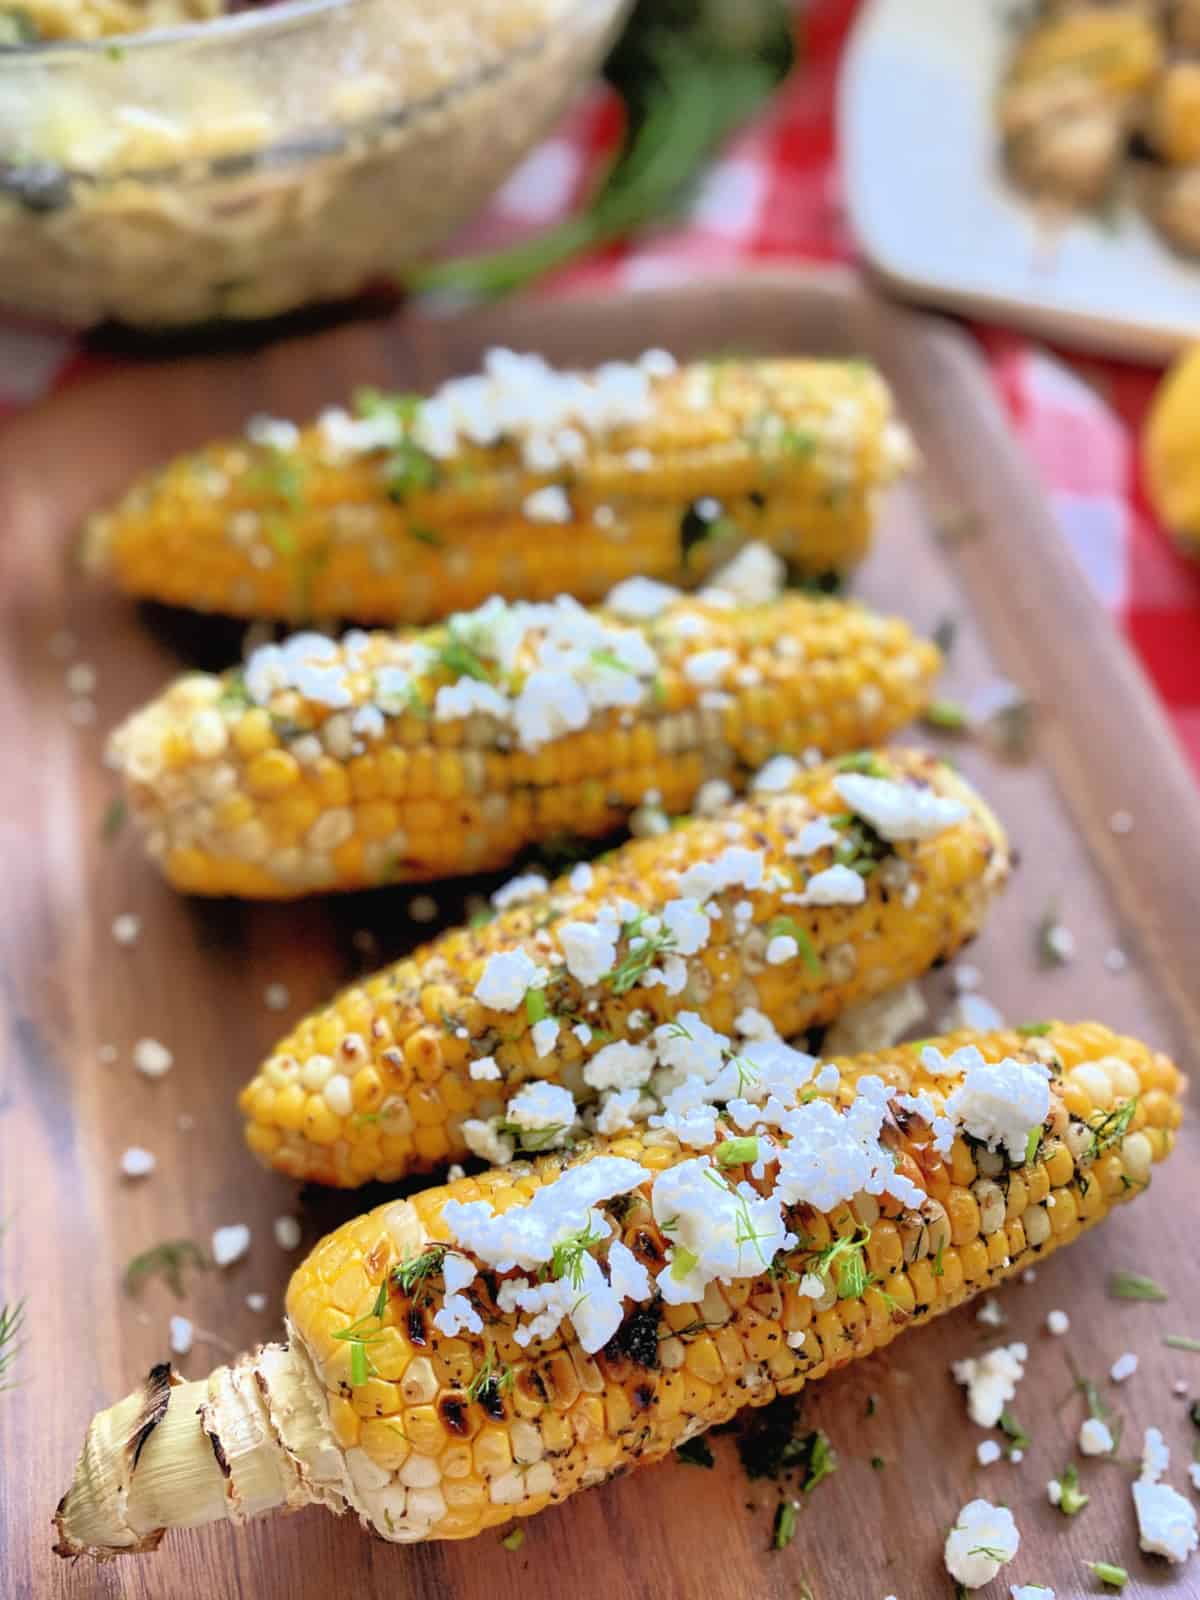 Corn on the cob on a wooden platter with feta crumbles and fresh dill.